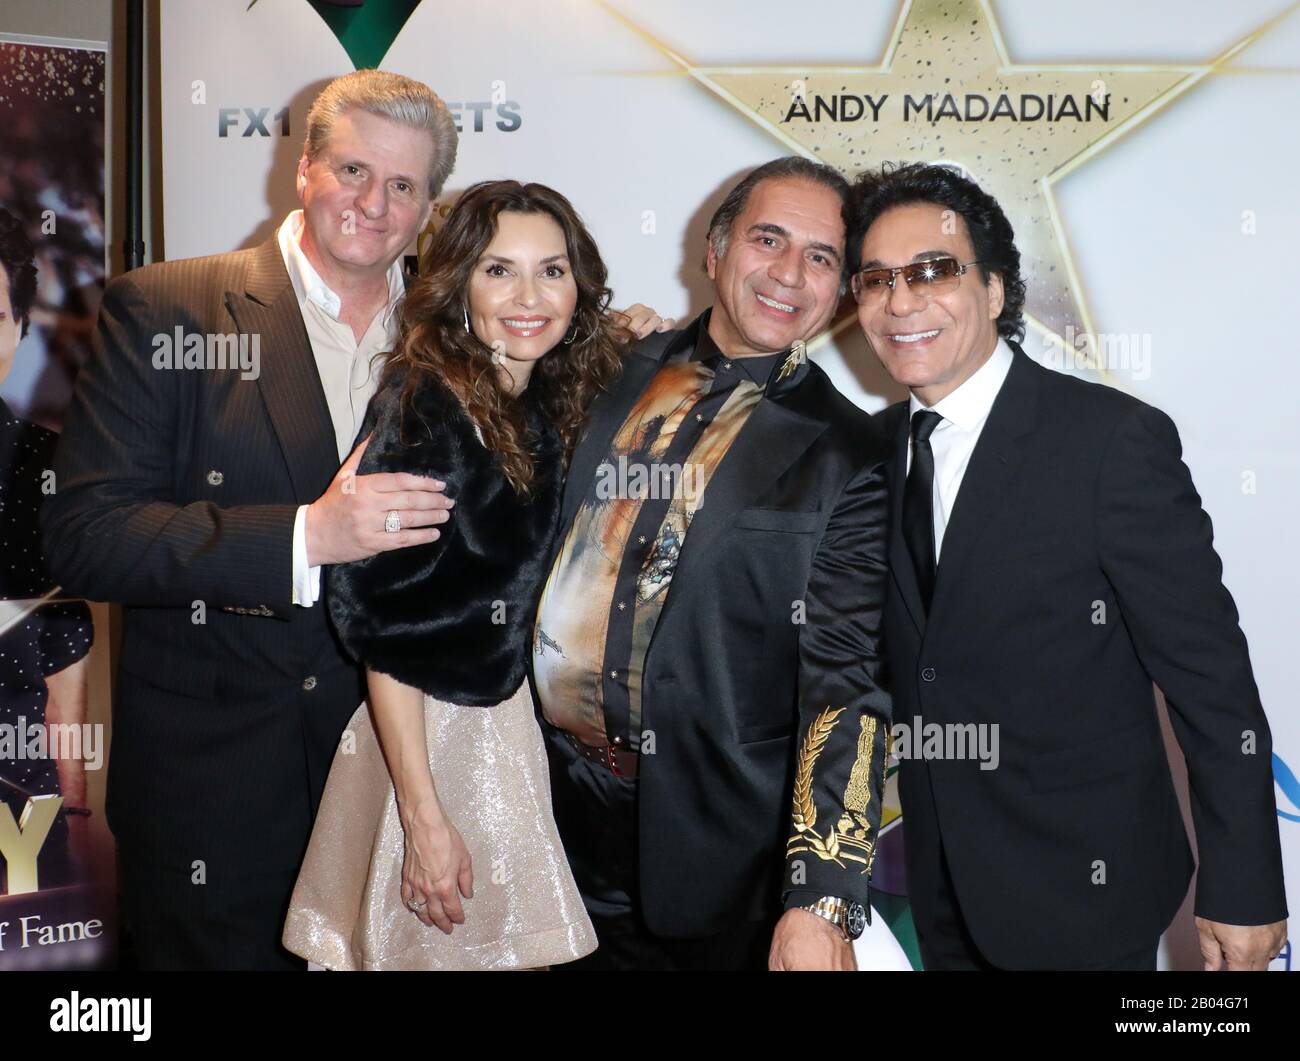 Andy Madadian Walk of Fame Star After Party at the Hollywood Museum in Hollywood, California on January 17, 2020 Featuring: Roger Neal, Shani Rigsbee, Antonio Gellini, Andy Madadian Where: Hollywood, California, United States When: 17 Jan 2020 Credit: Sheri Determan/WENN.com Stock Photo